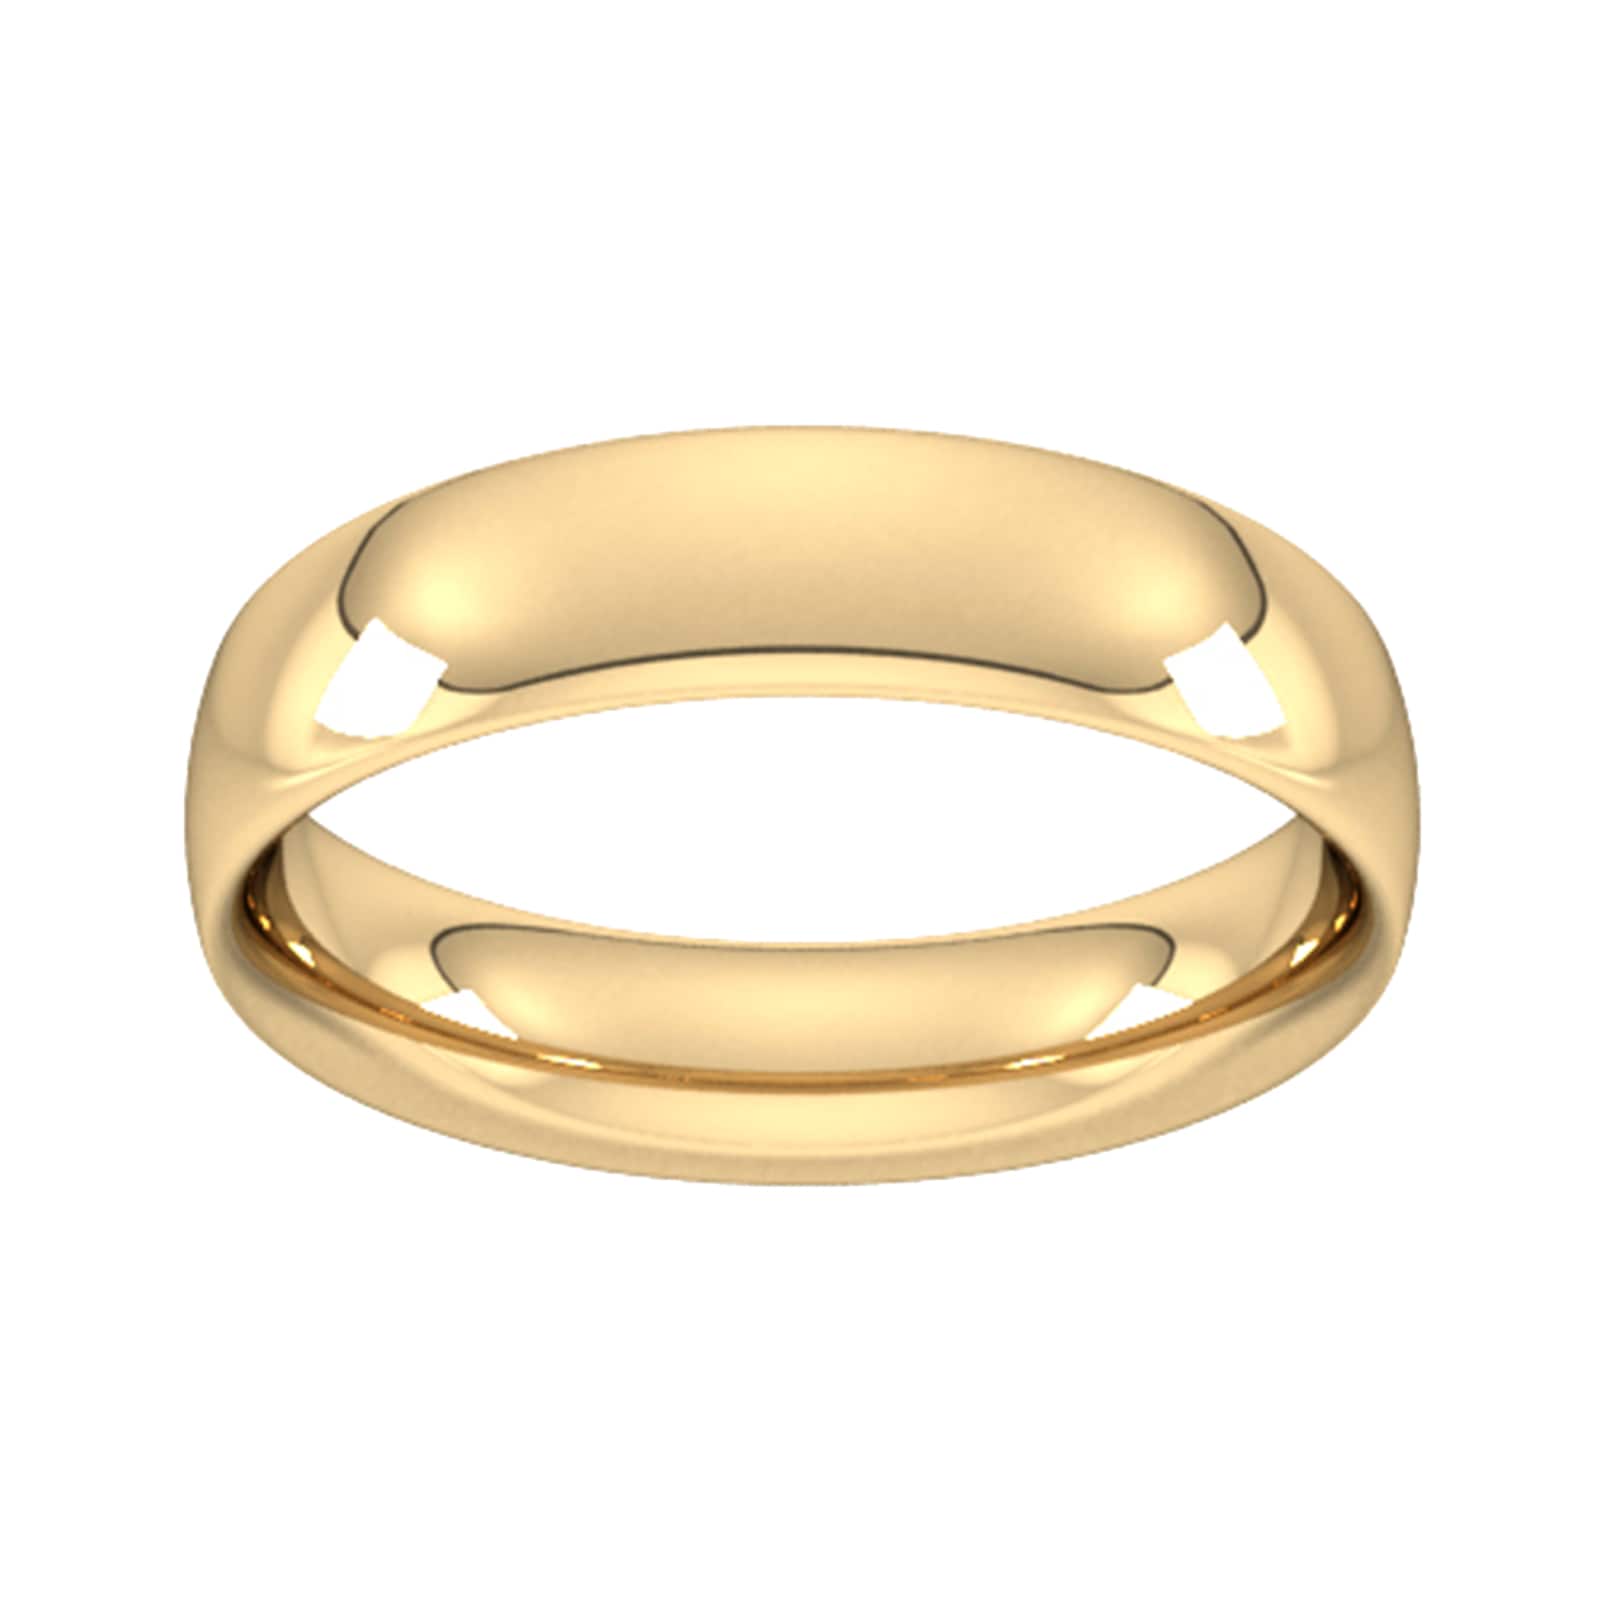 5mm Traditional Court Heavy Wedding Ring In 9 Carat Yellow Gold - Ring Size R